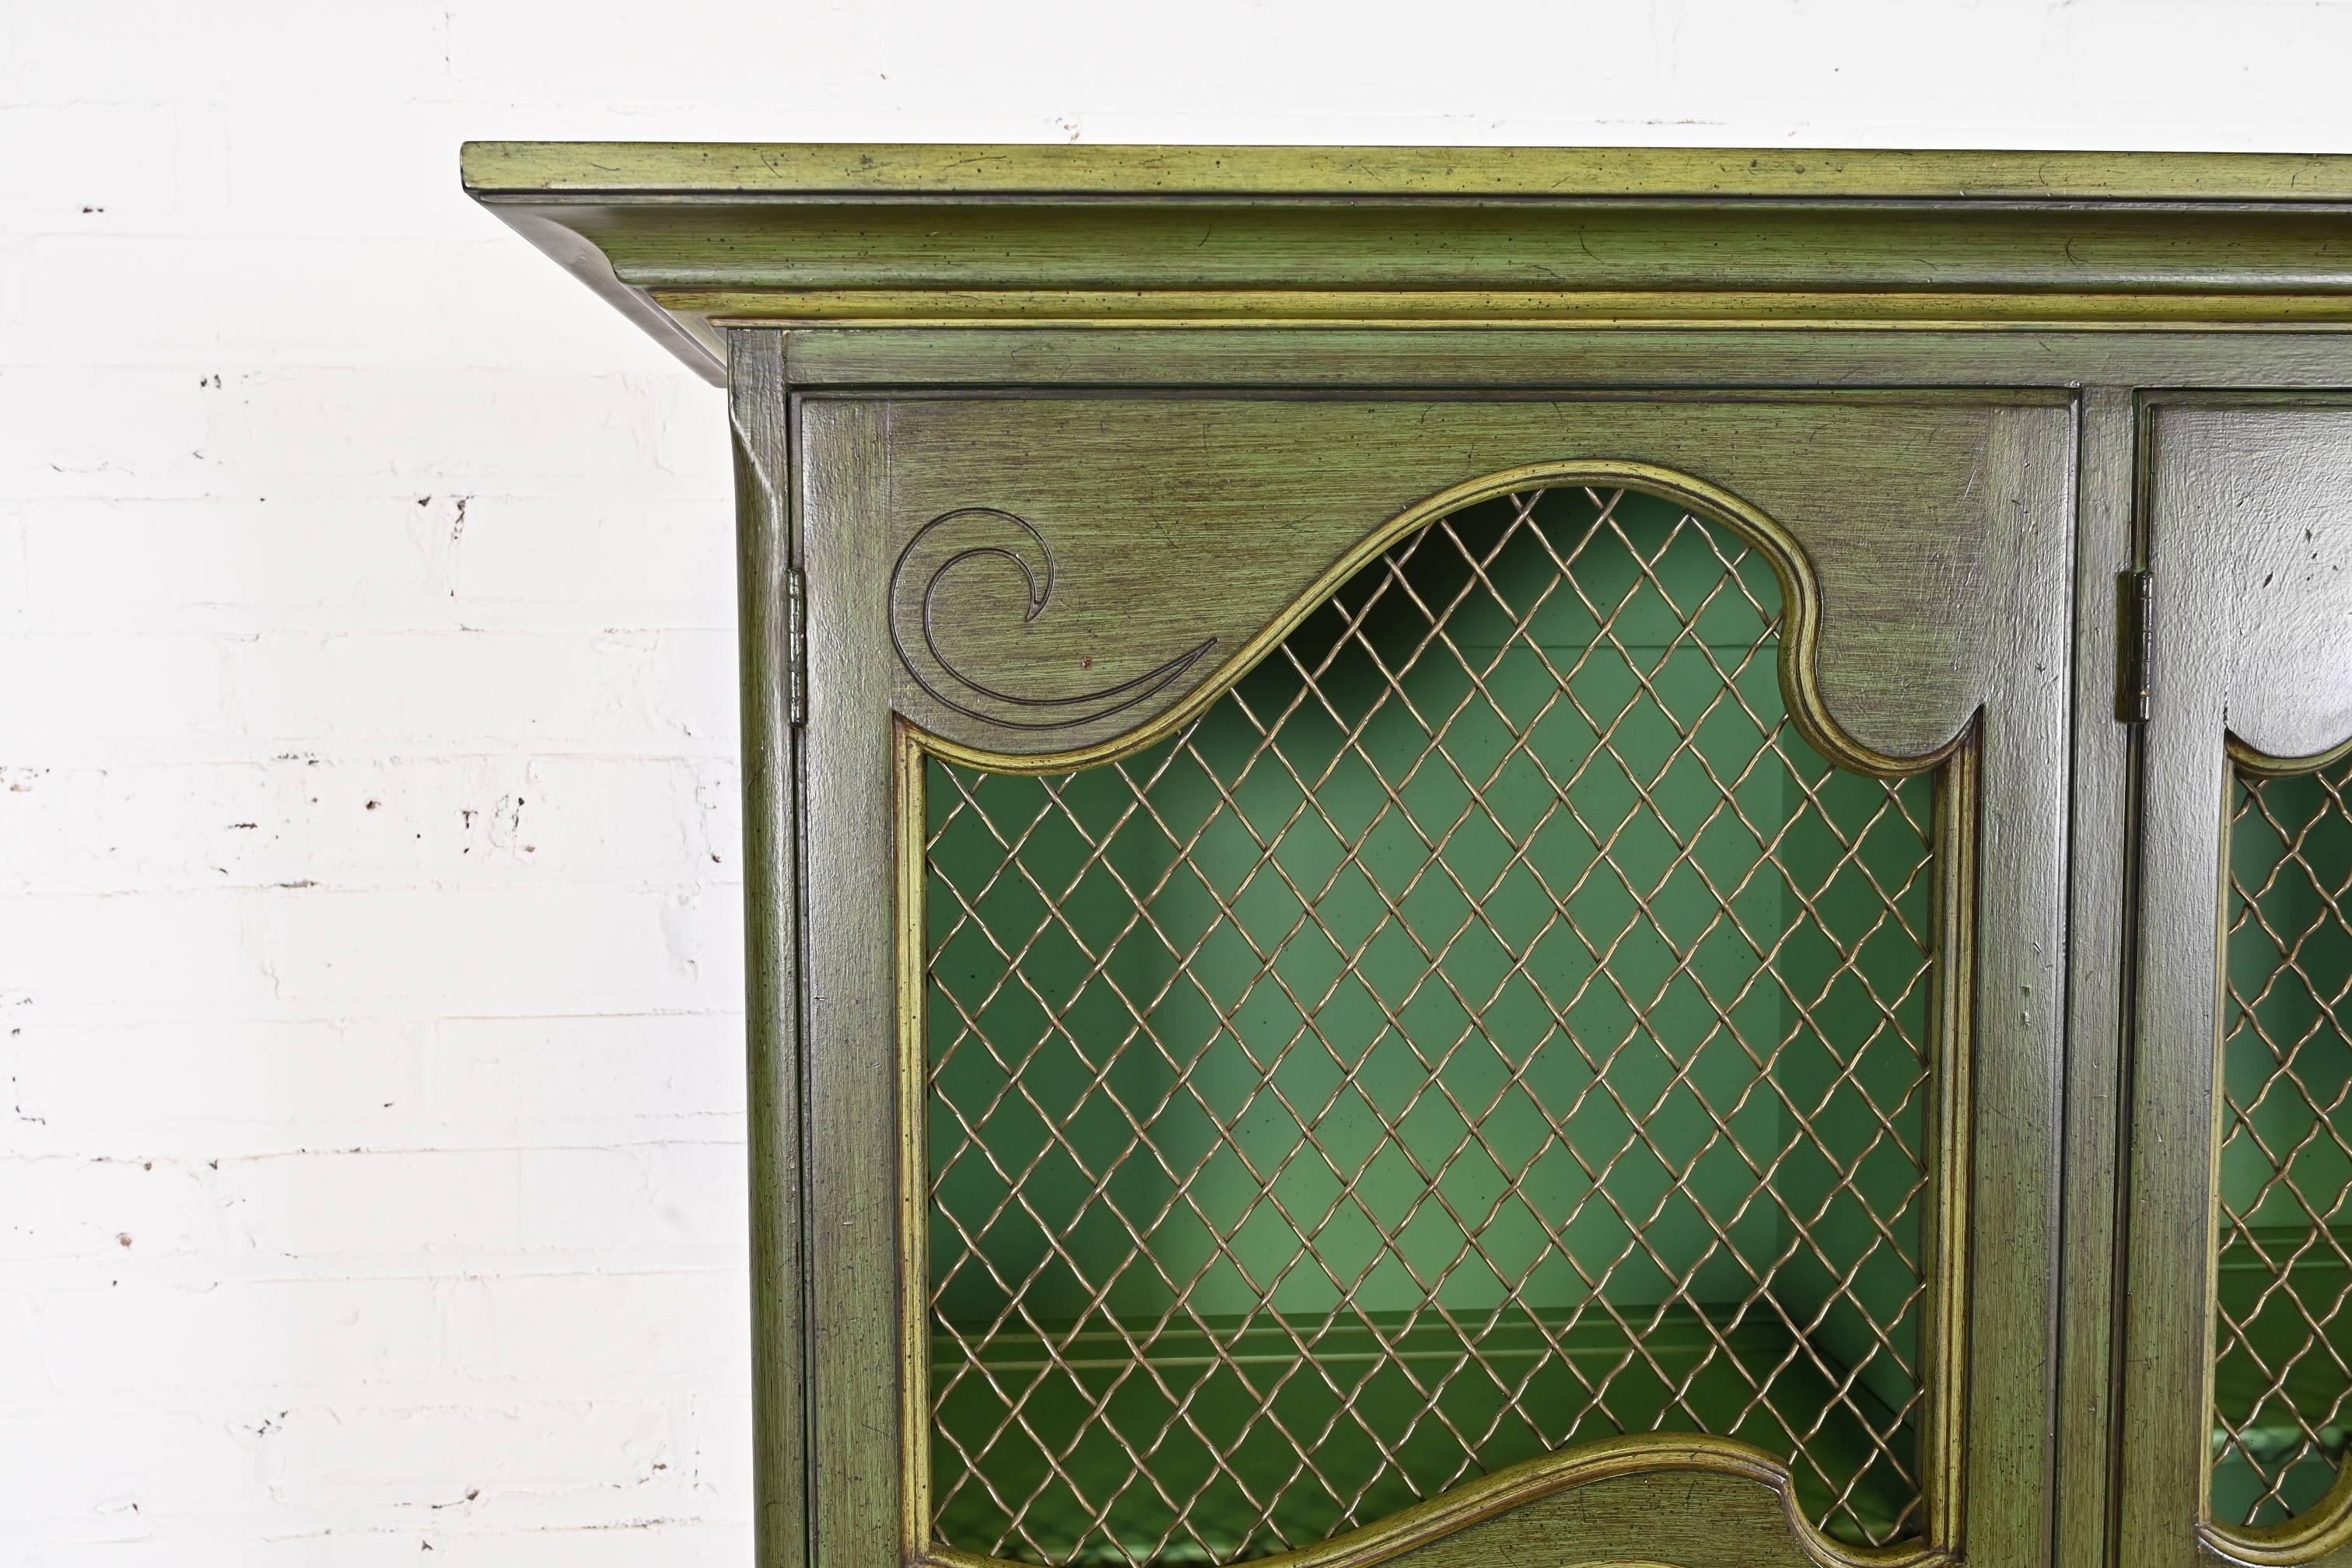 Karges French Provincial Louis XV Green Lacquered Breakfront Bookcase Cabinet 1